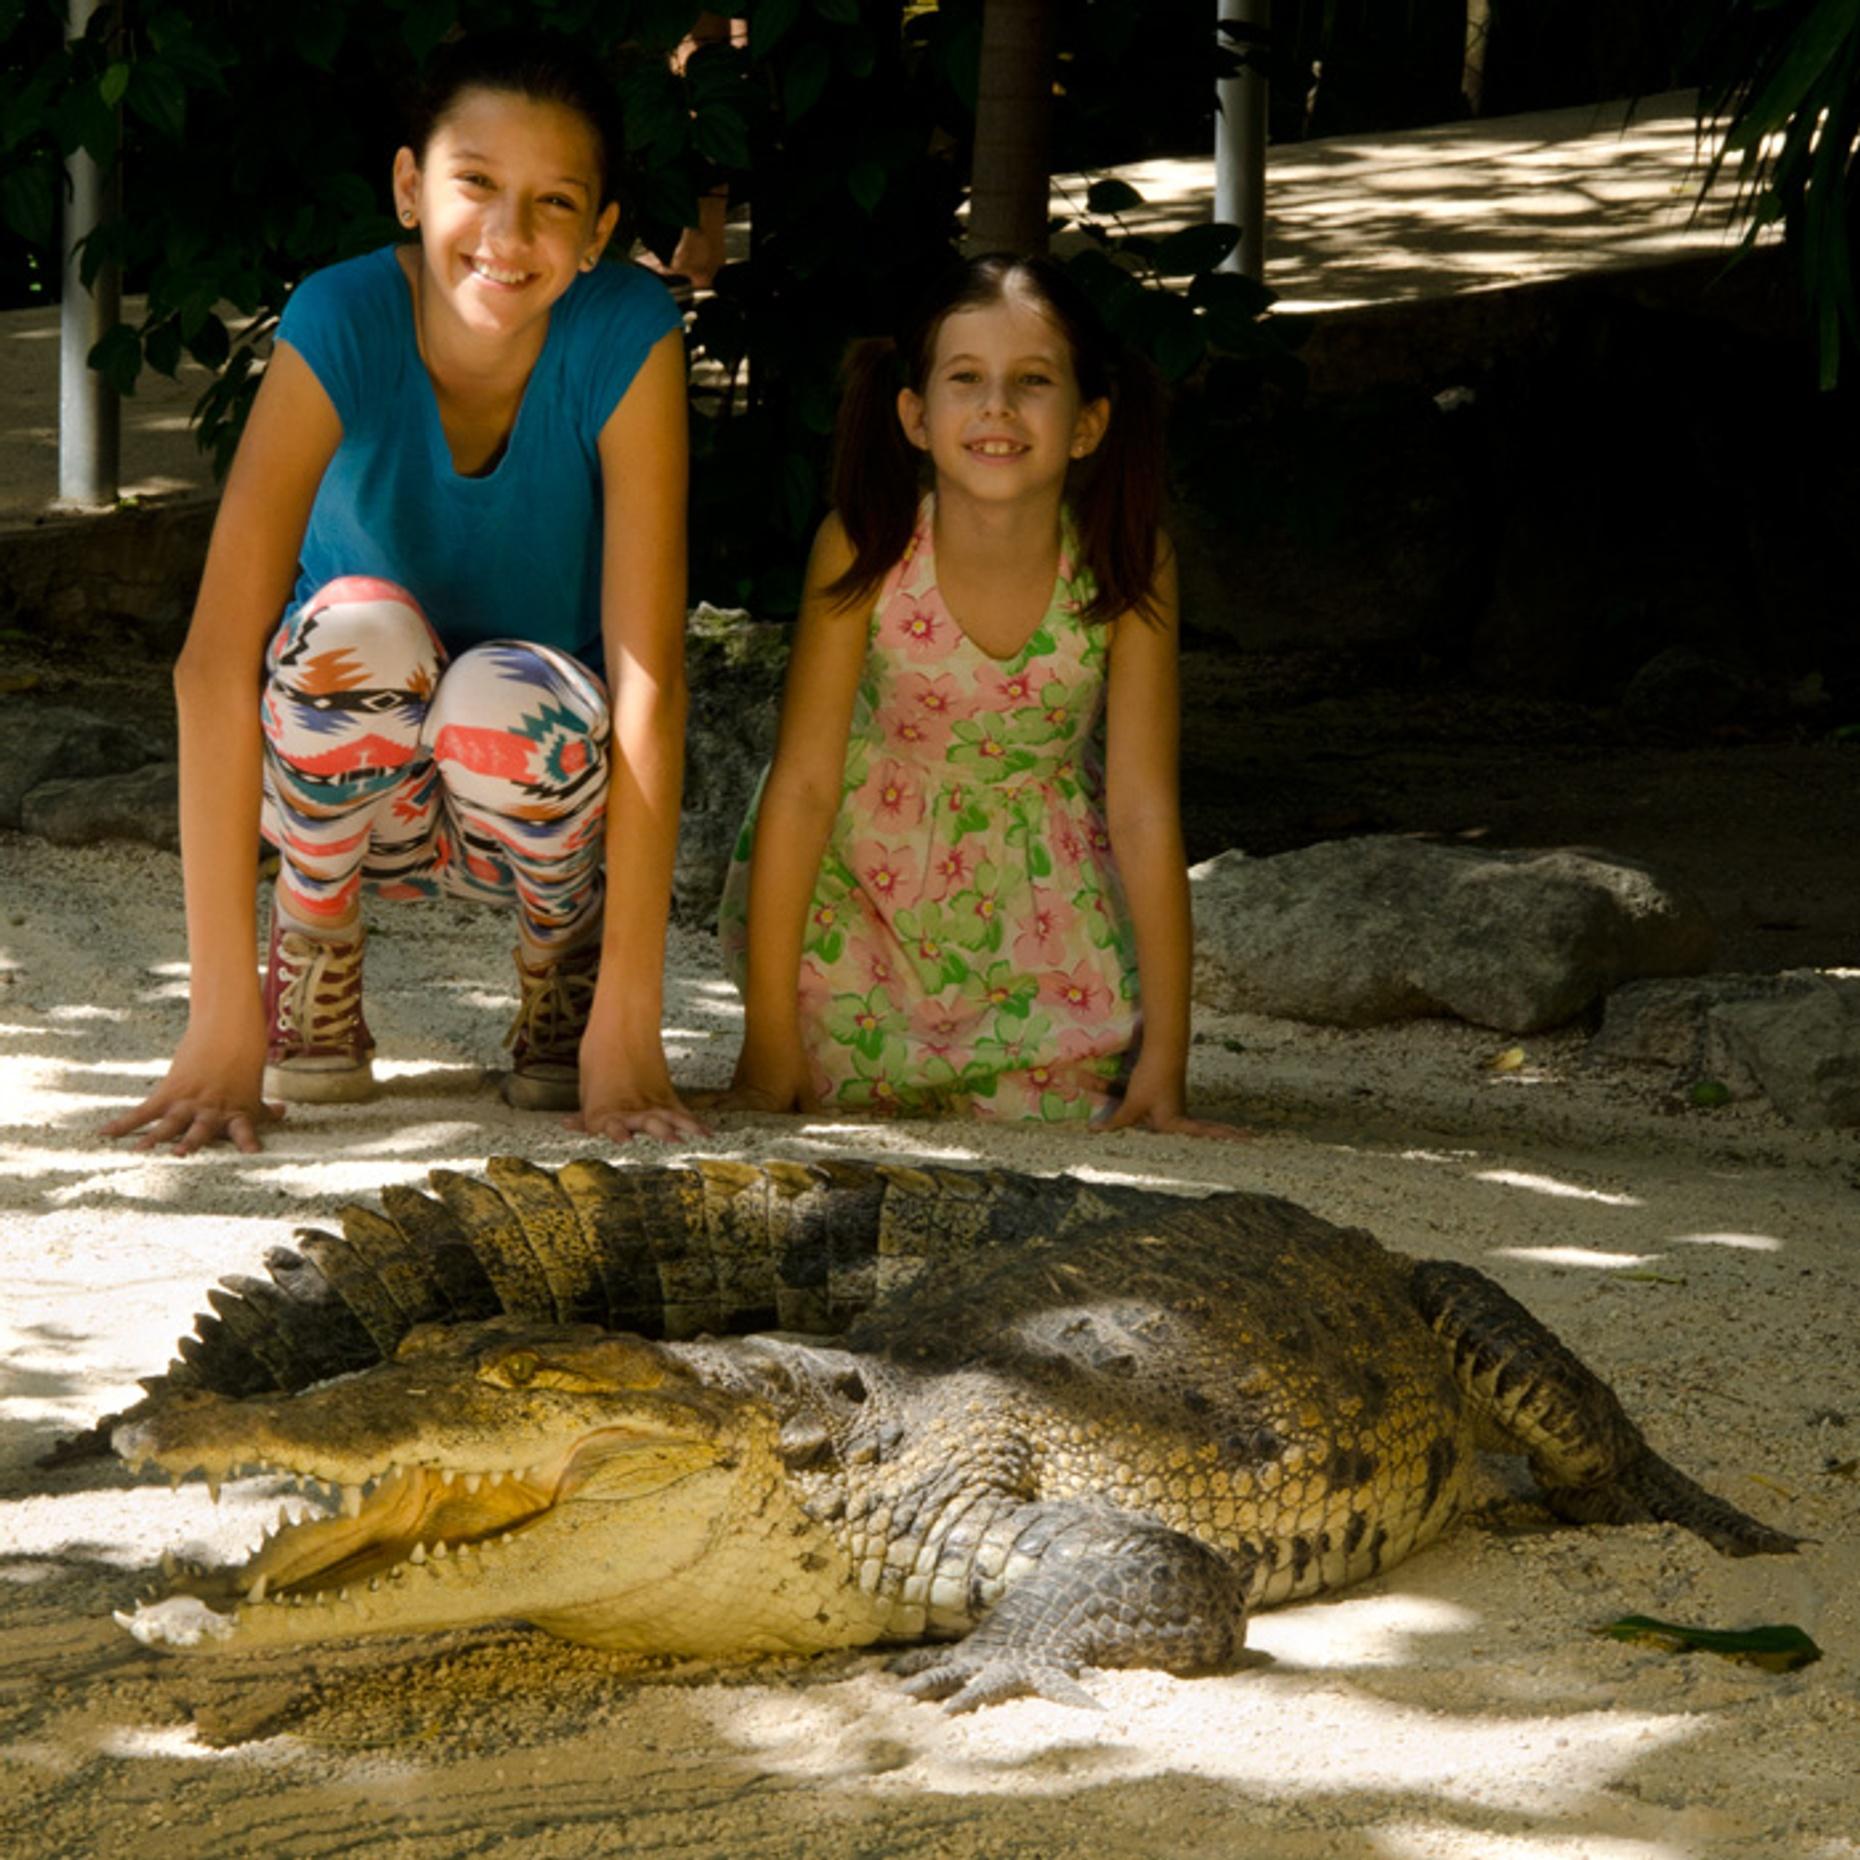 Interactive Tour of a Zoo in Cancun